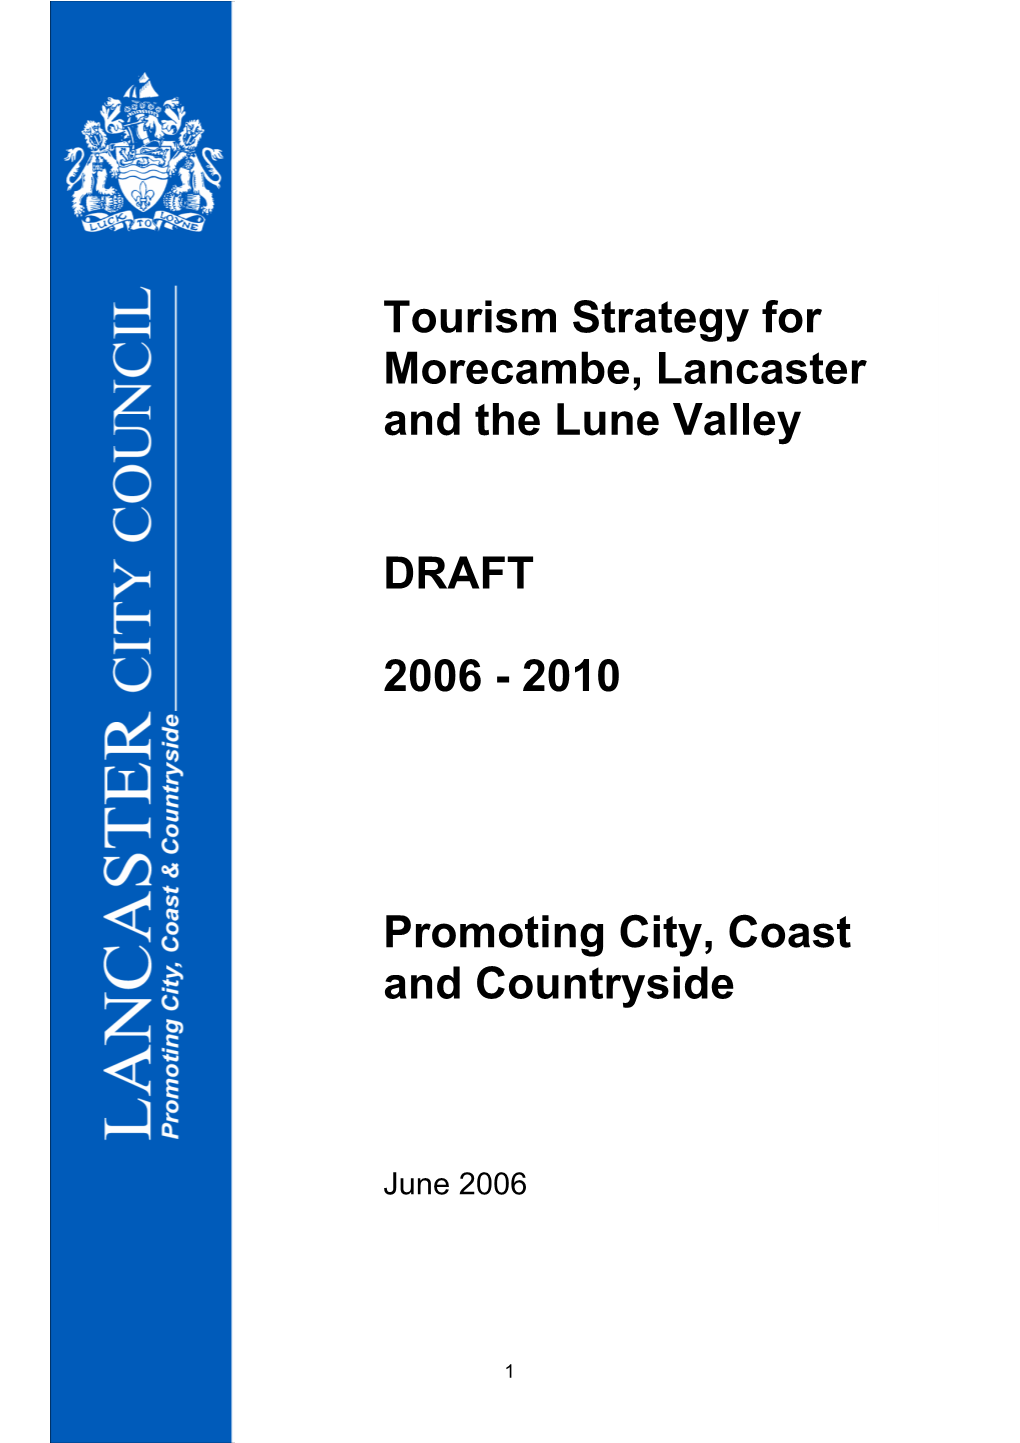 Tourism Strategy for Morecambe, Lancaster and the Lune Valley DRAFT 2006